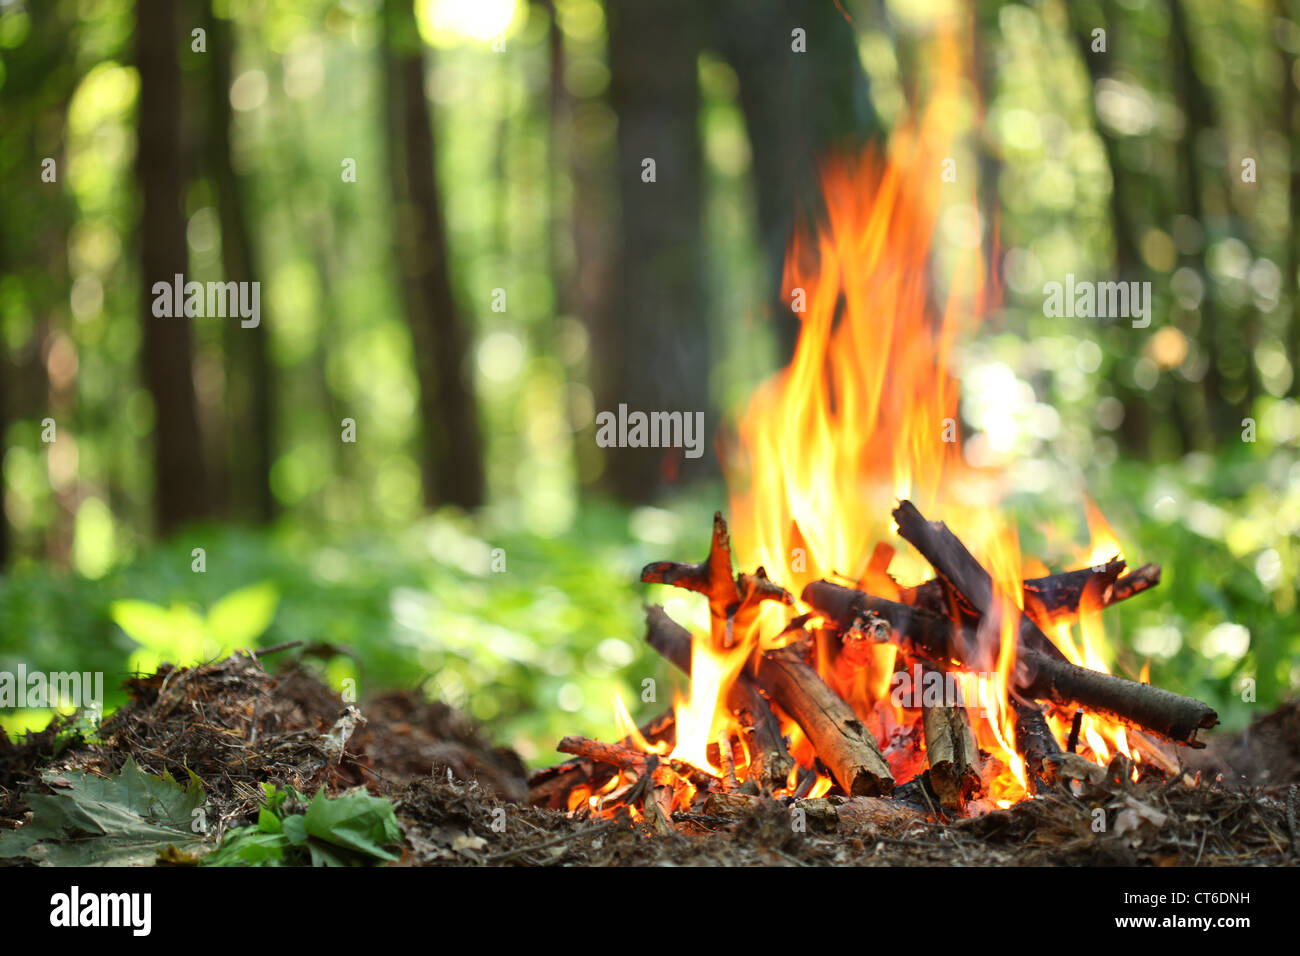 Bonfire in the forest. Stock Photo